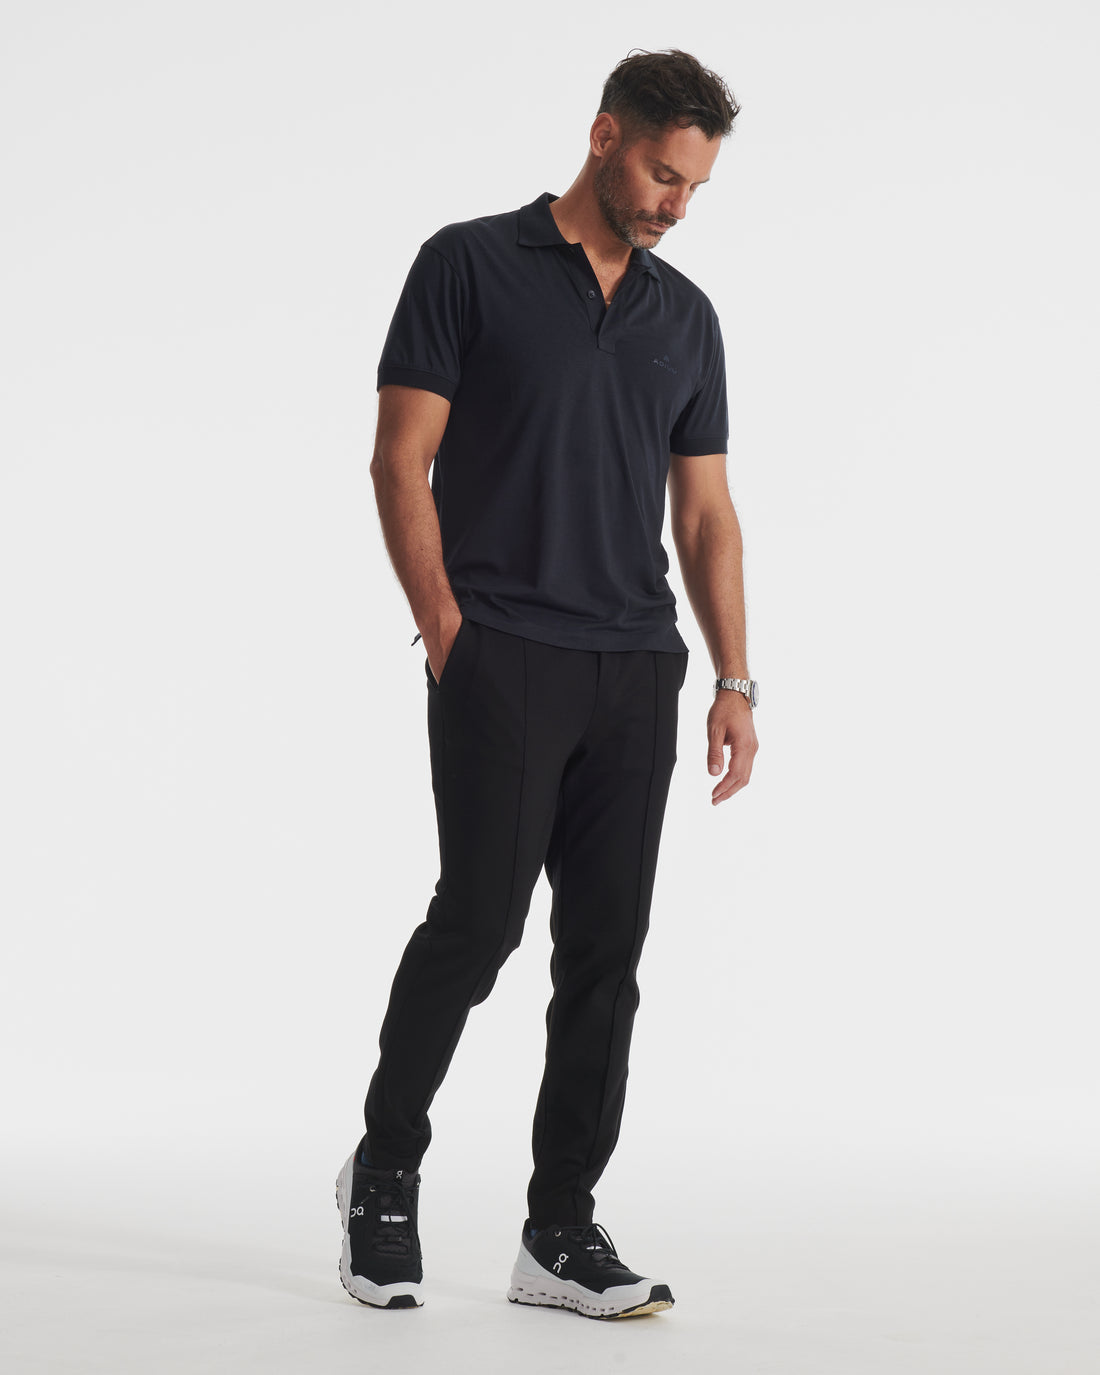 Black Dual Knit Pant | "The Future of Fitness" Men's Health